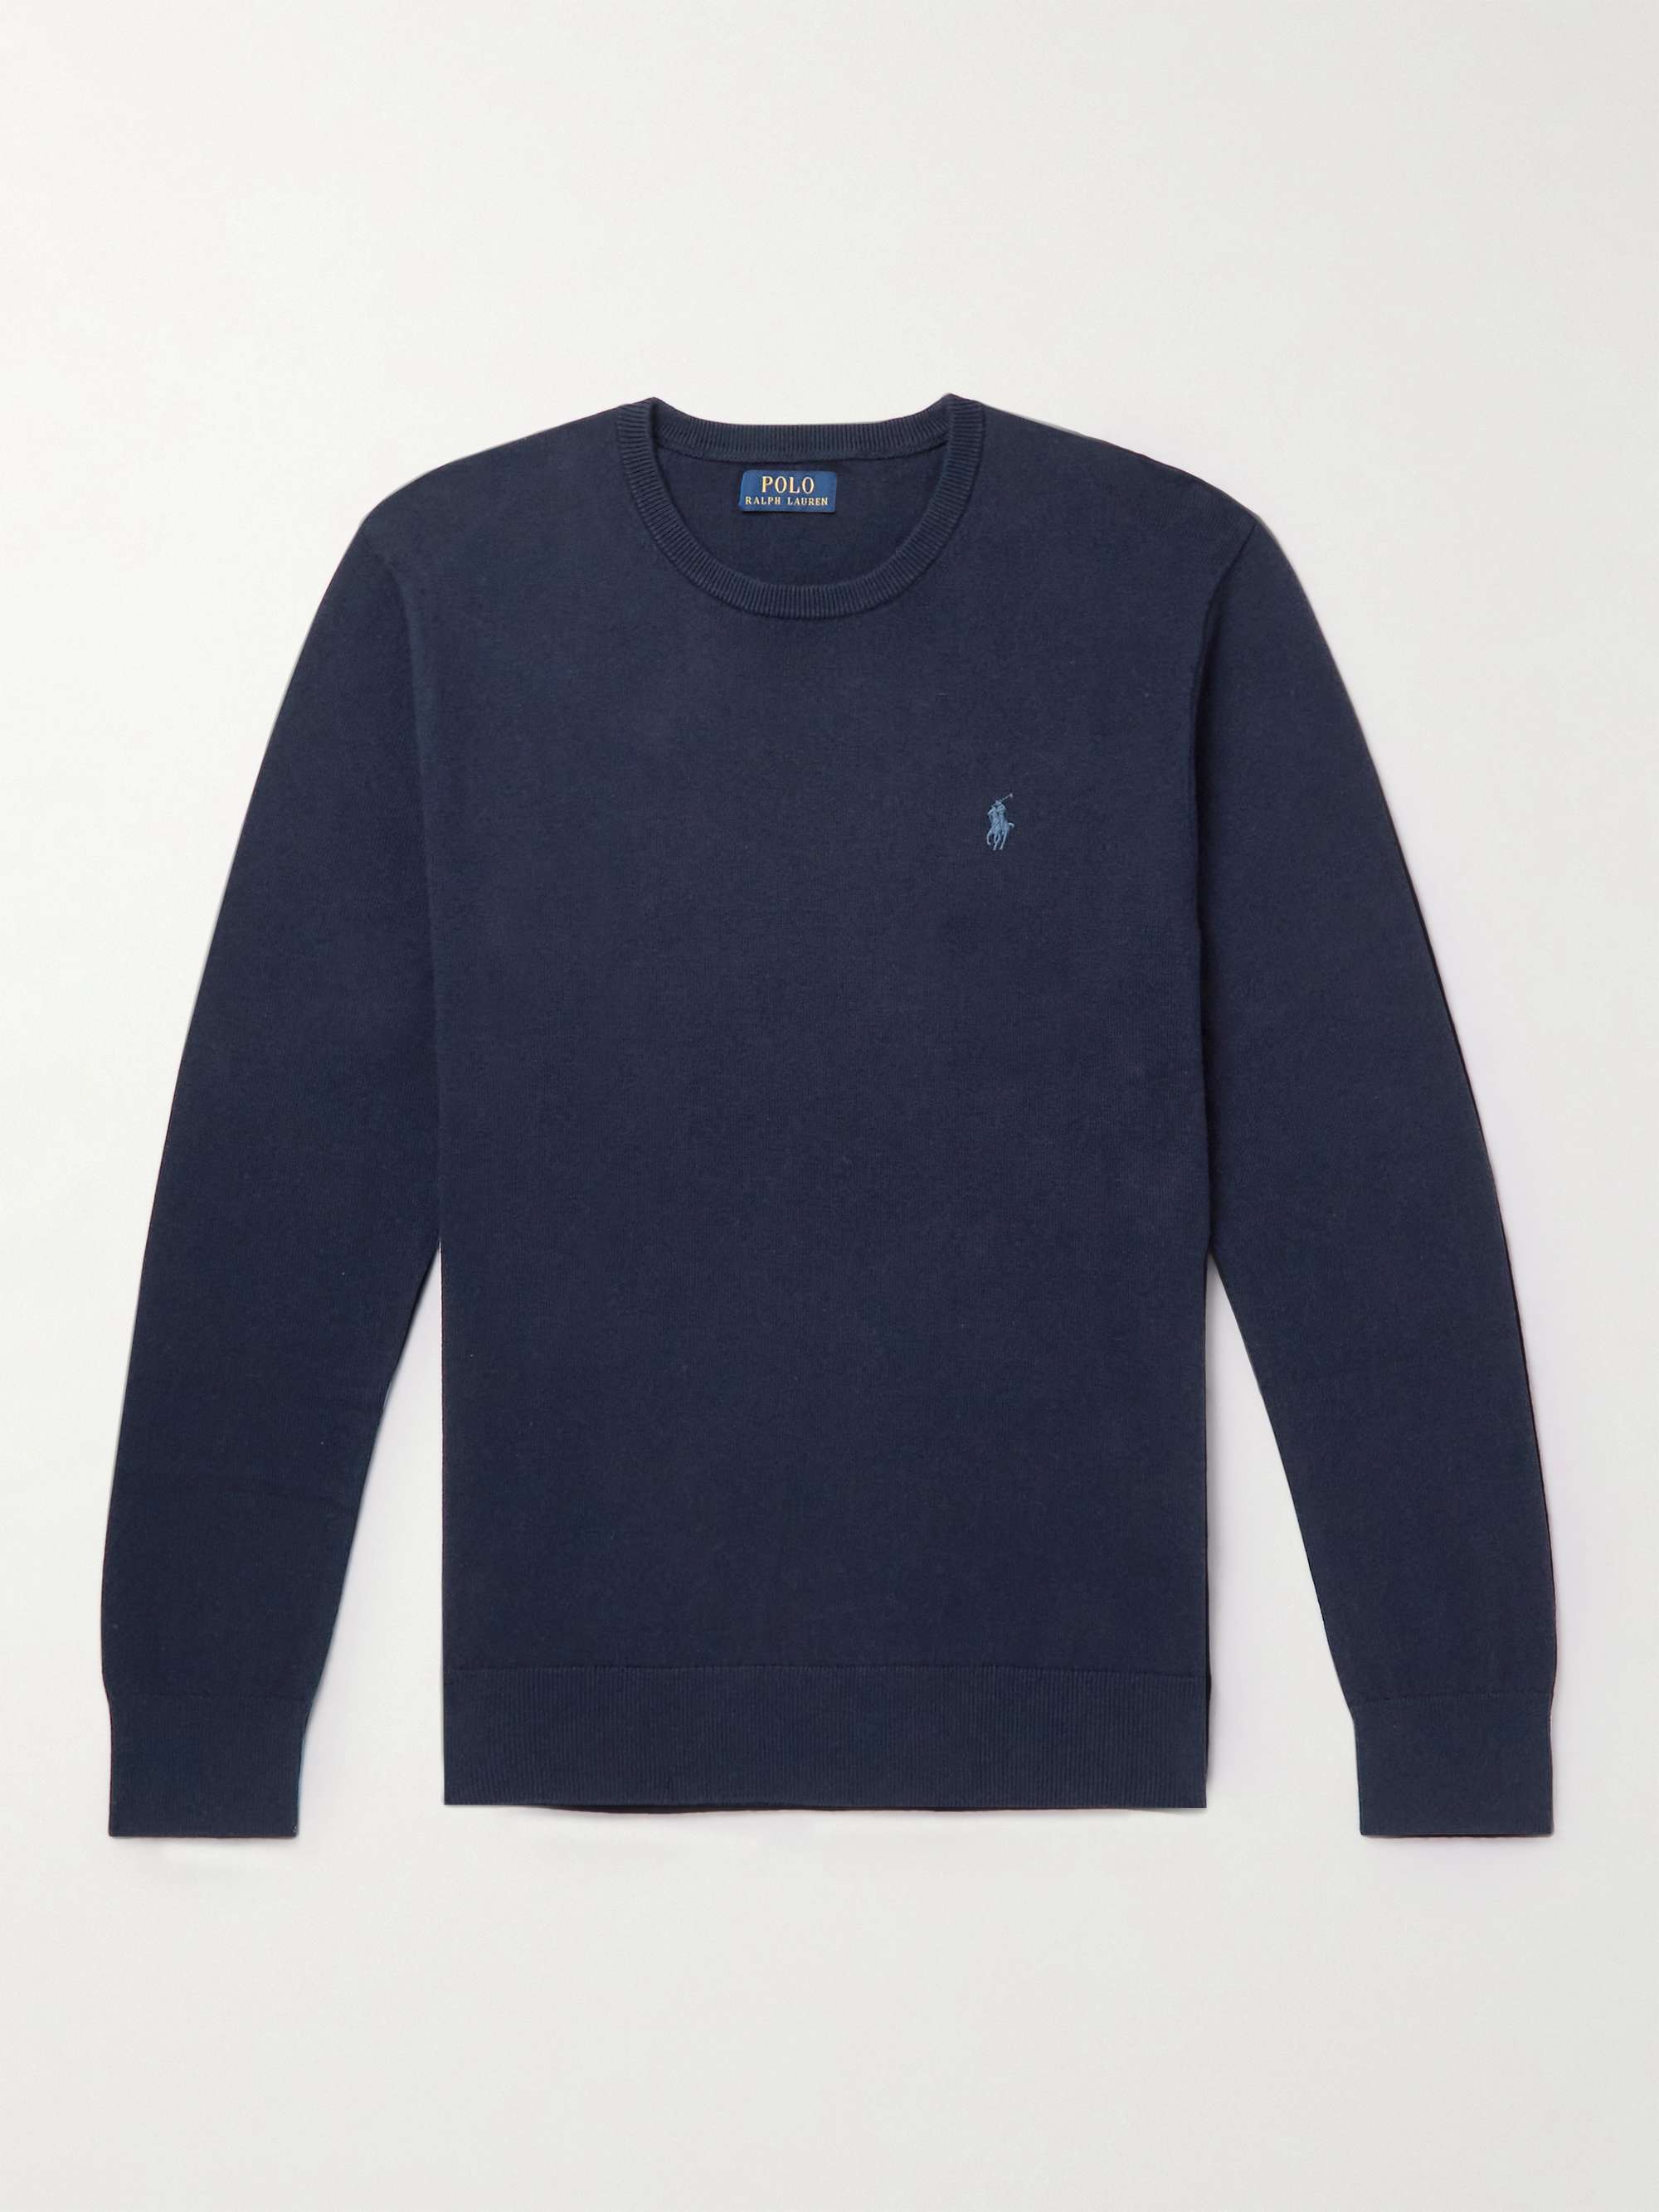 POLO RALPH LAUREN Logo-Embroidered Cotton and Cashmere-Blend Sweater